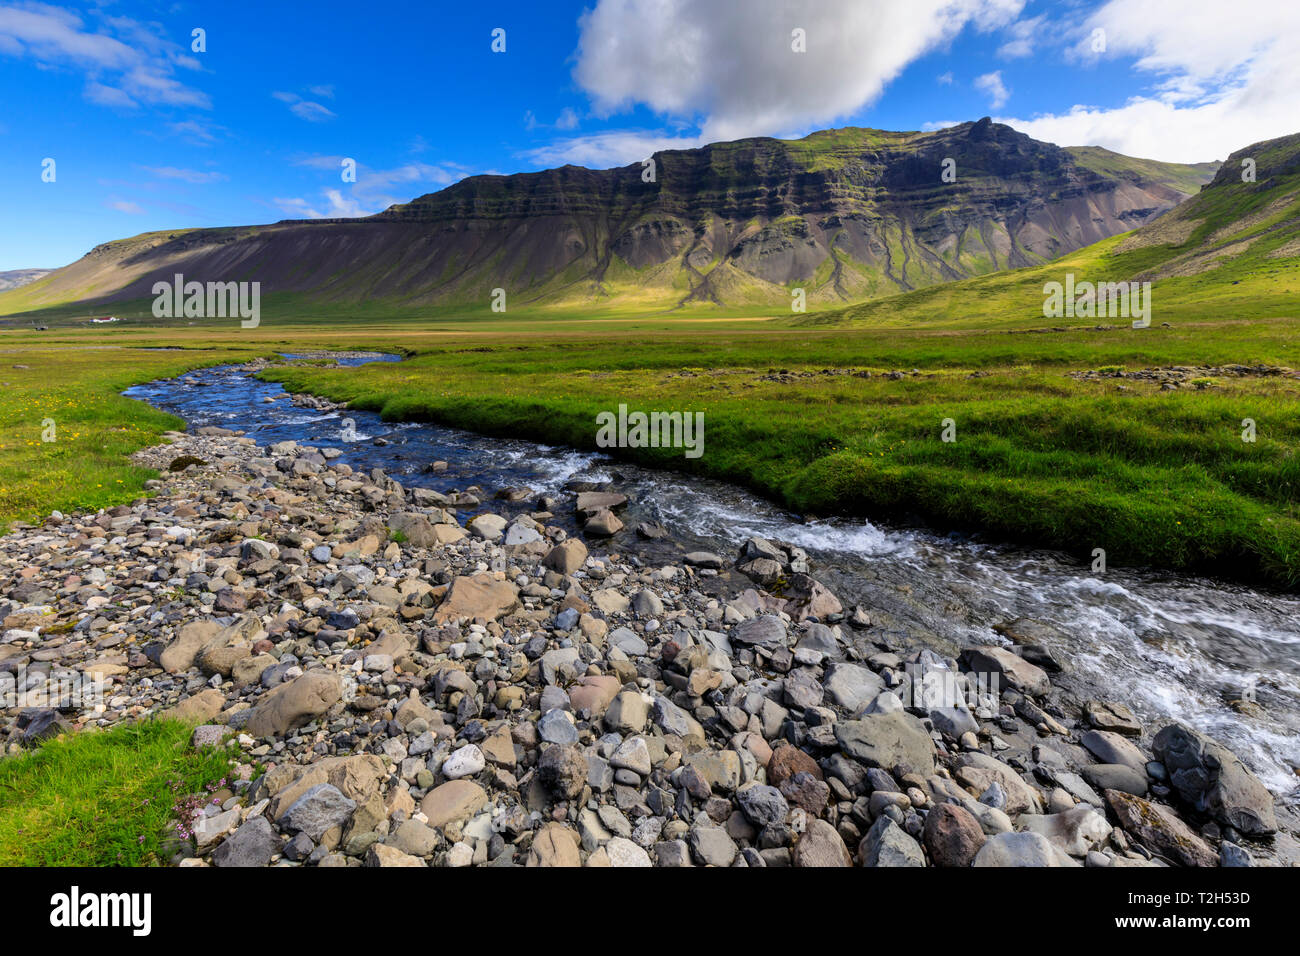 River by mountains in Grundarfjordur, Iceland, Europe Stock Photo